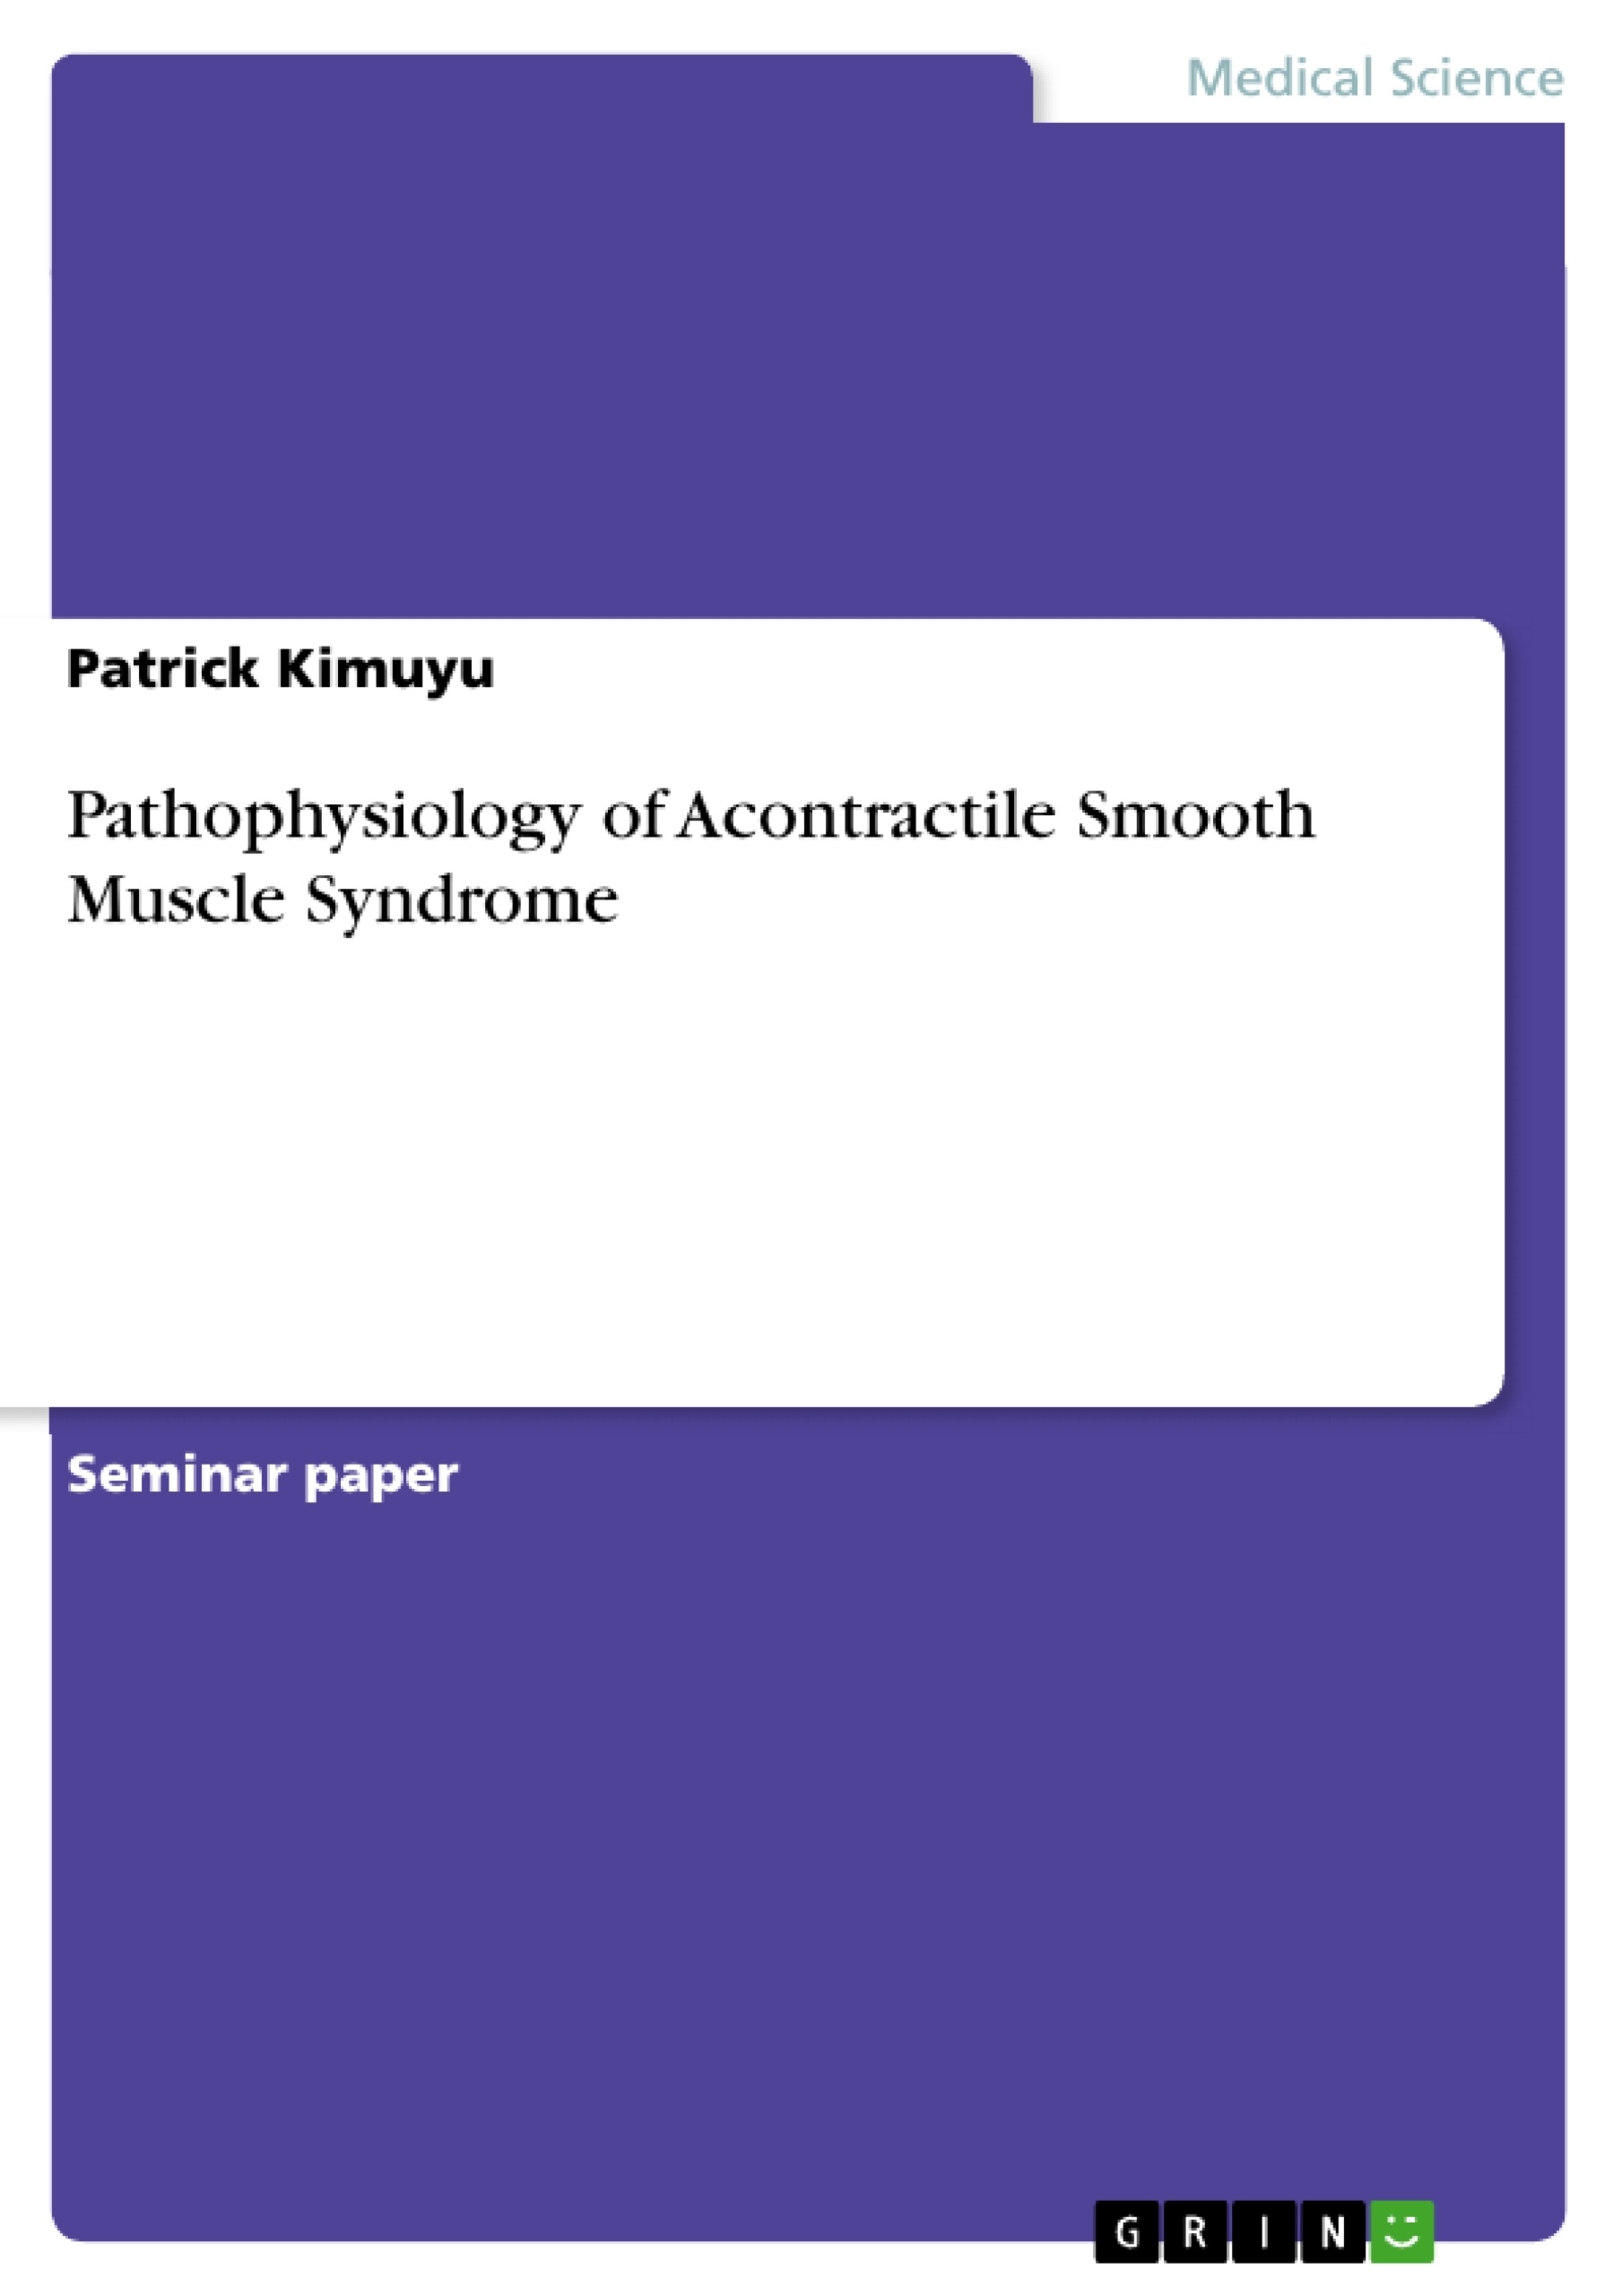 Titel: Pathophysiology of Acontractile Smooth Muscle Syndrome